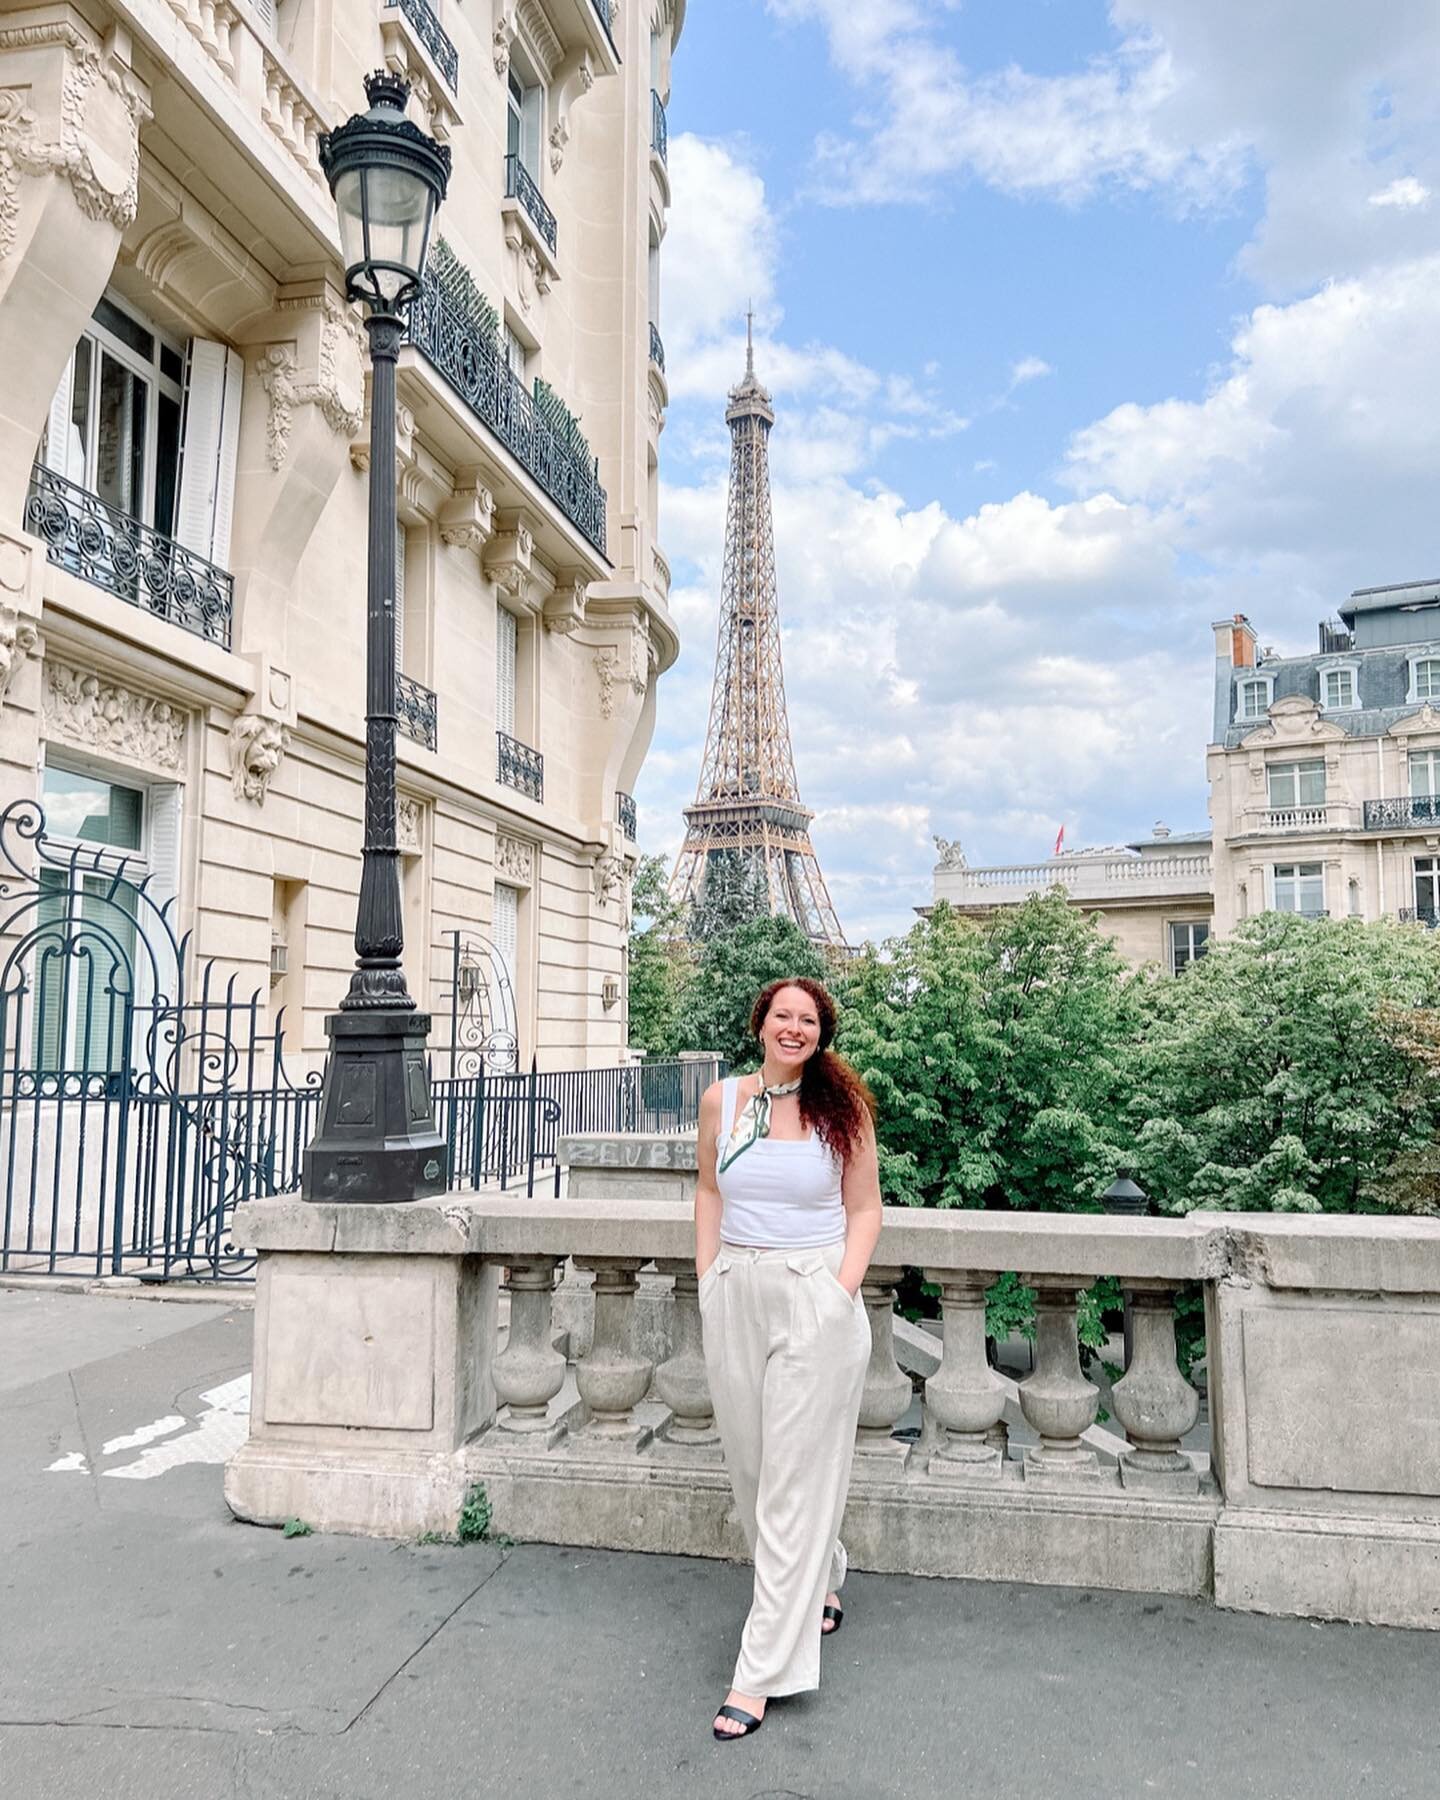 ✨ Paris: Part 1 ✨

Cassi spam incoming! 🤣 My friend @mekinasaylor and I got together for a few days in Paris before attending a luxury wedding conference called  @engagesummits. We photographed the new Paris Capsule coming soon to @shop.loveodette, 